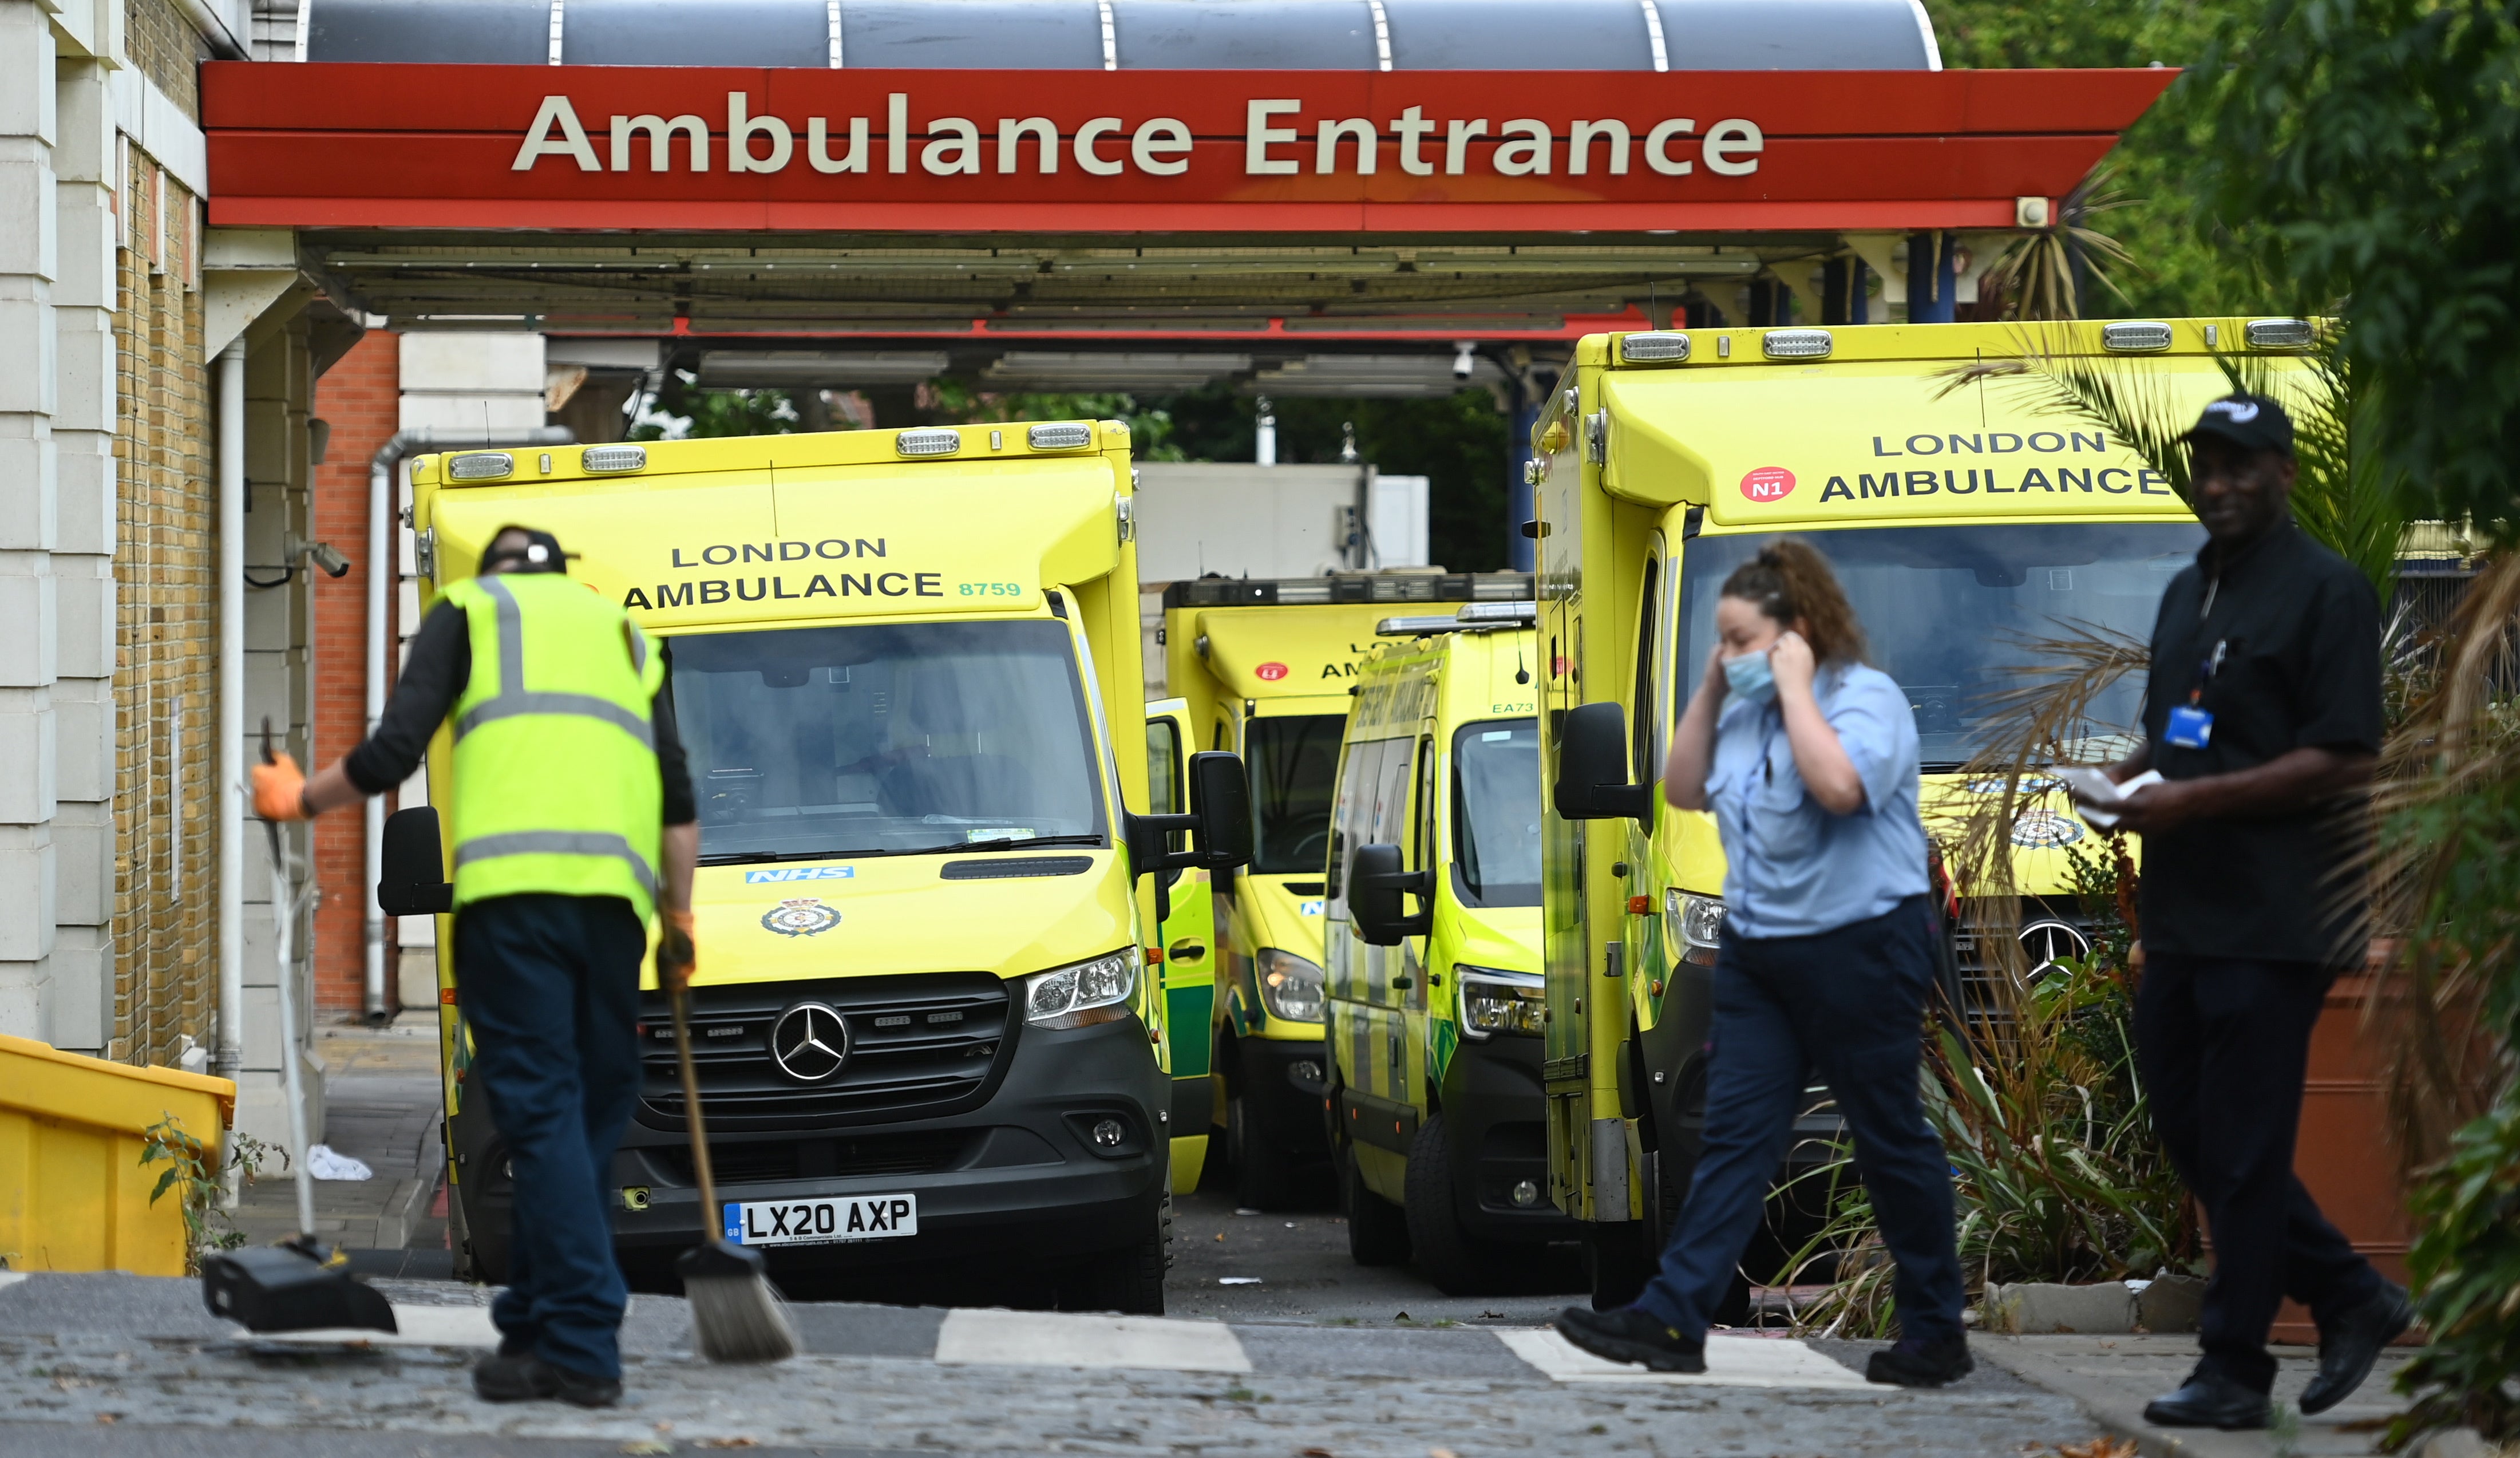 Non-emergency line will be promoted to ease pressure on paramedics and A&E [file photo]